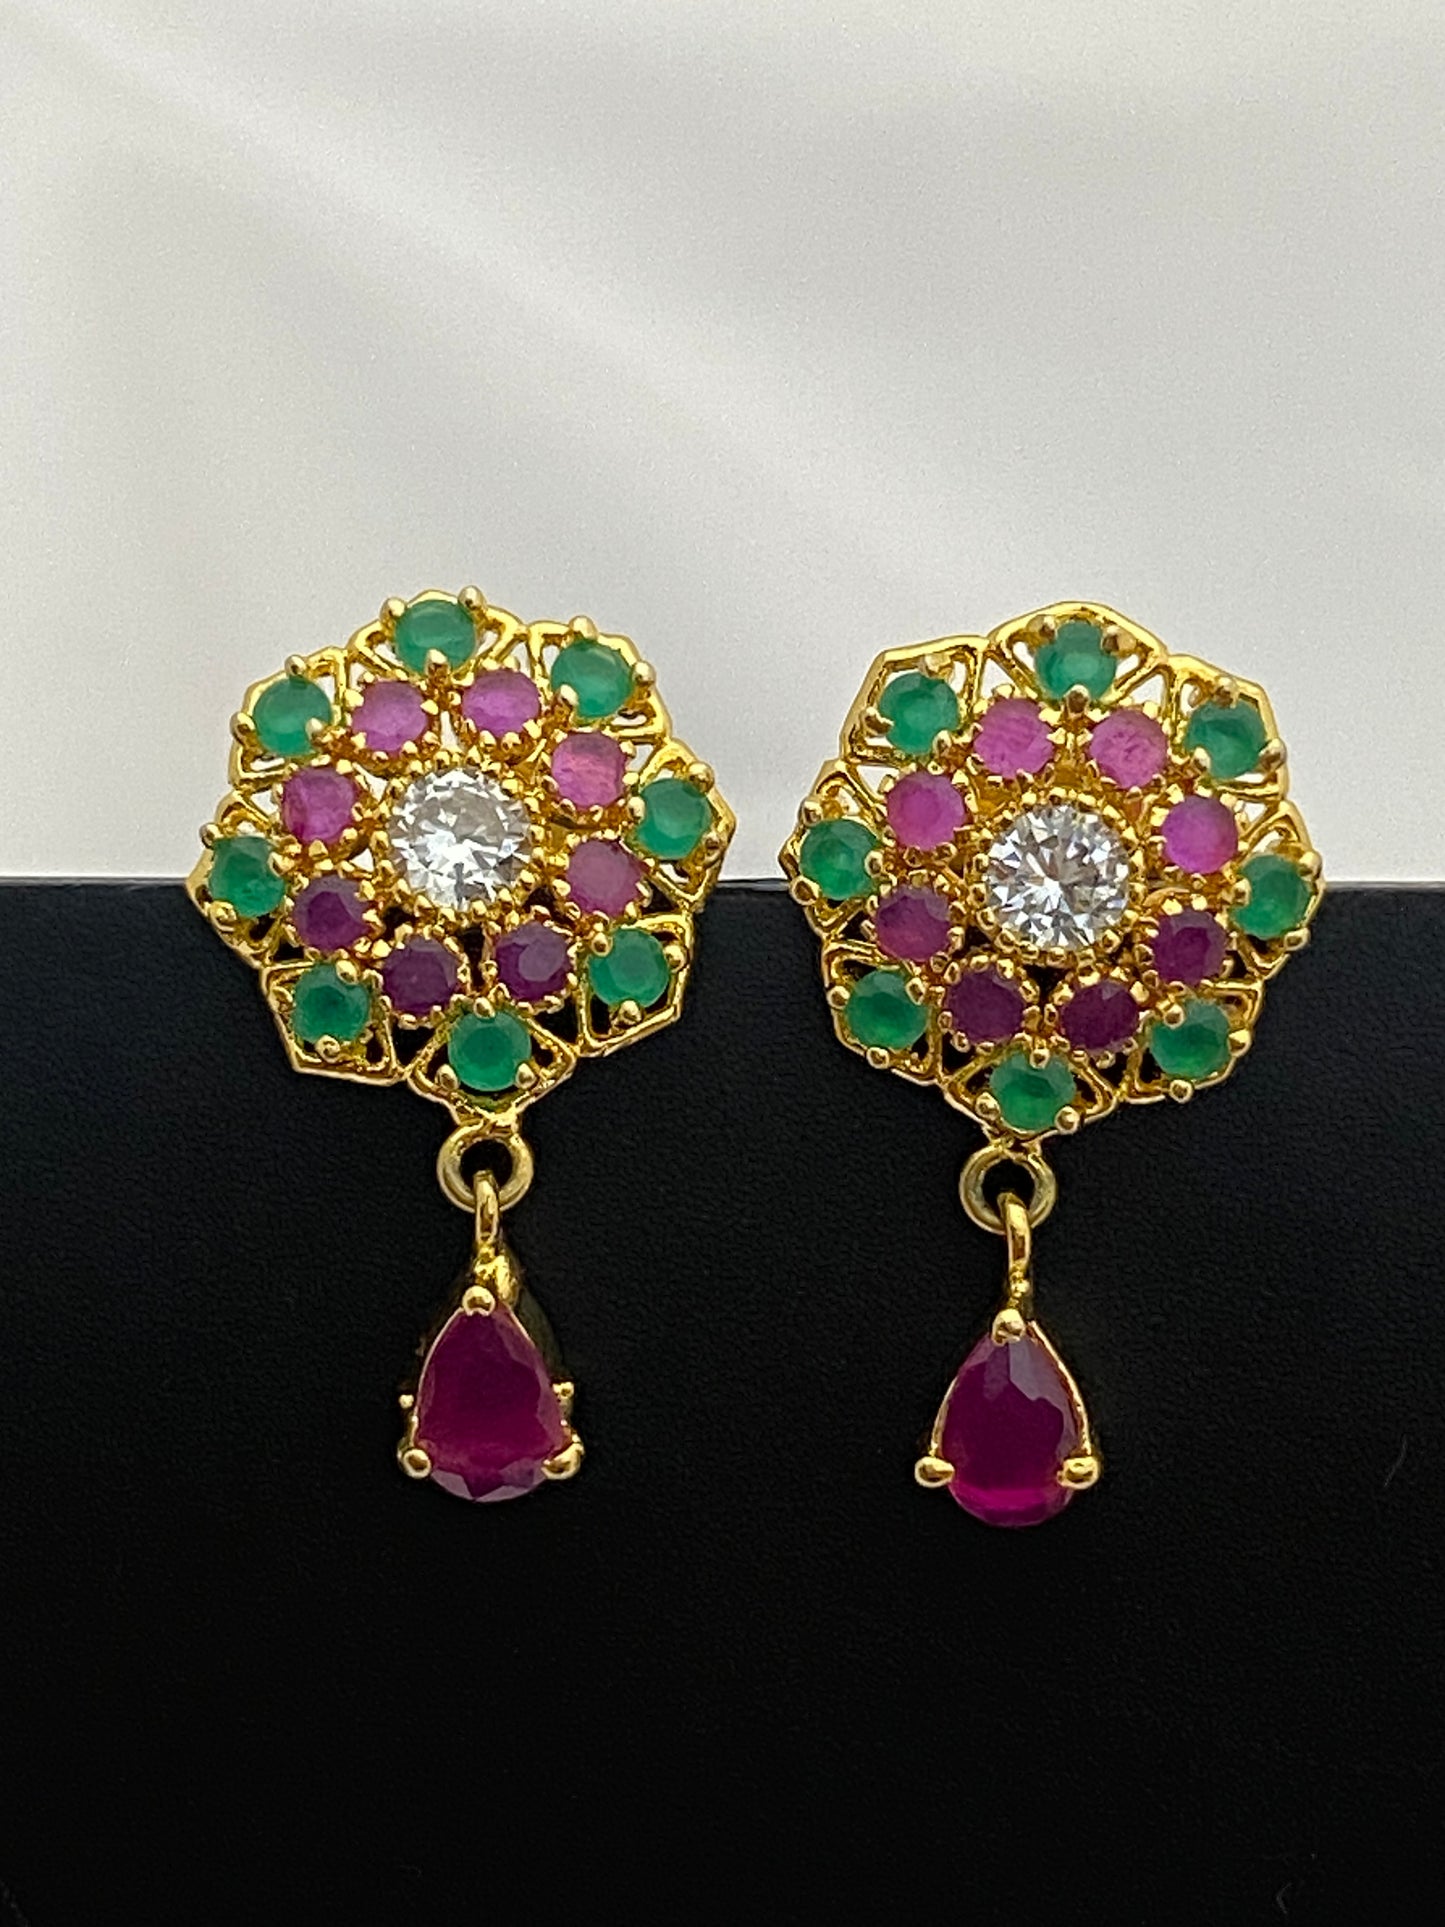 Delightful Ruby And Emerald Stoned Earrings For Women